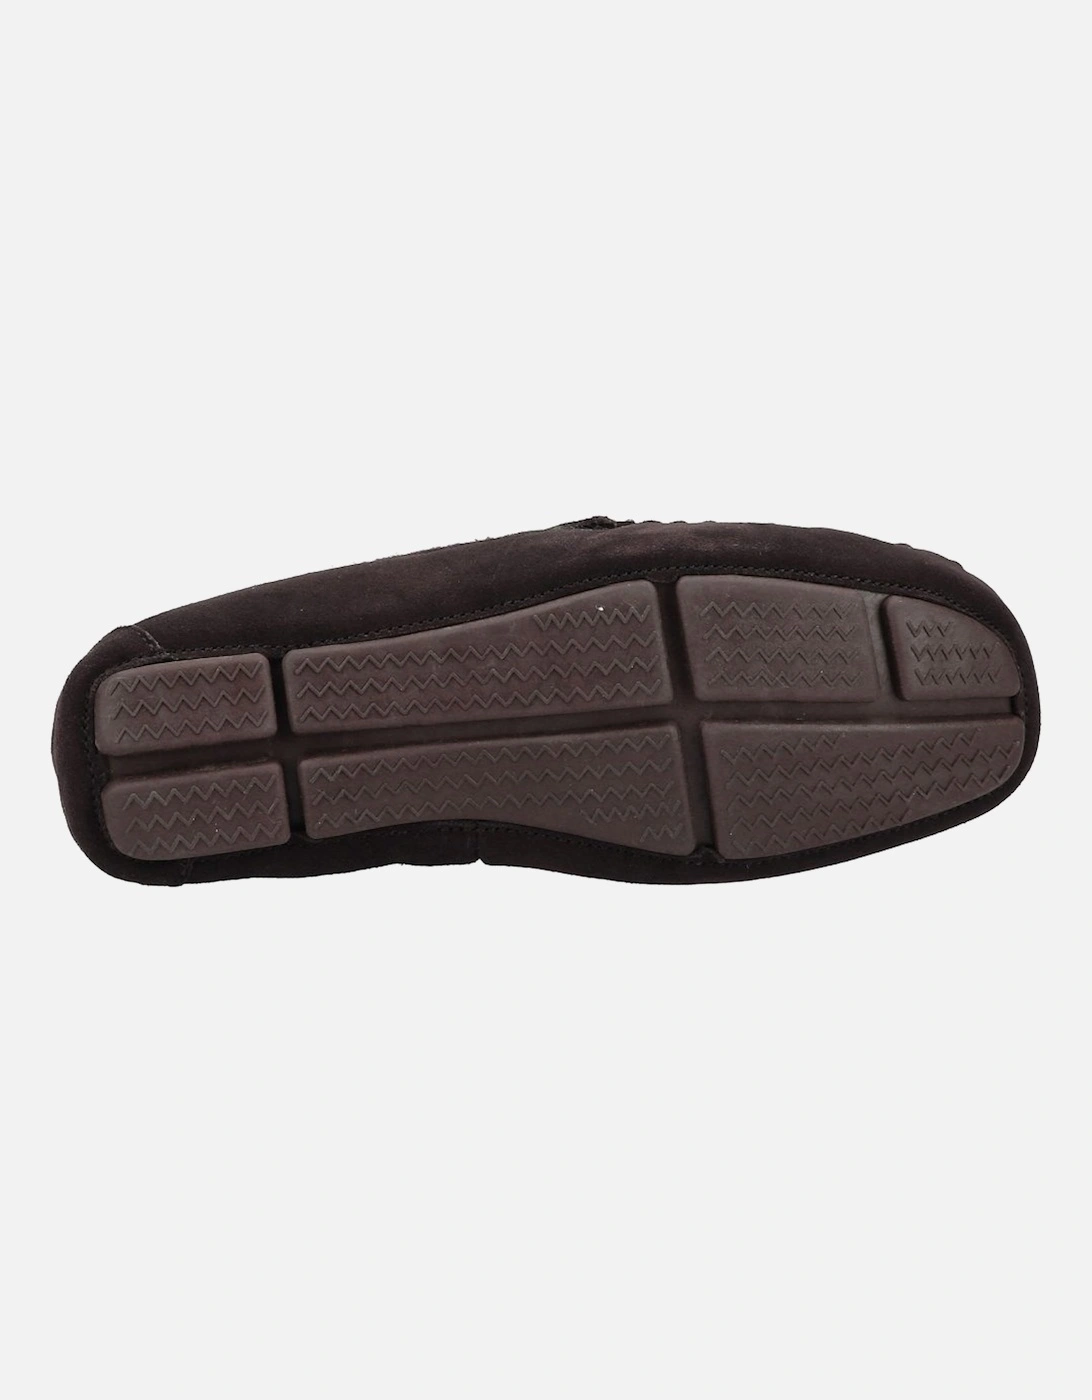 Andreas Mens Slippers